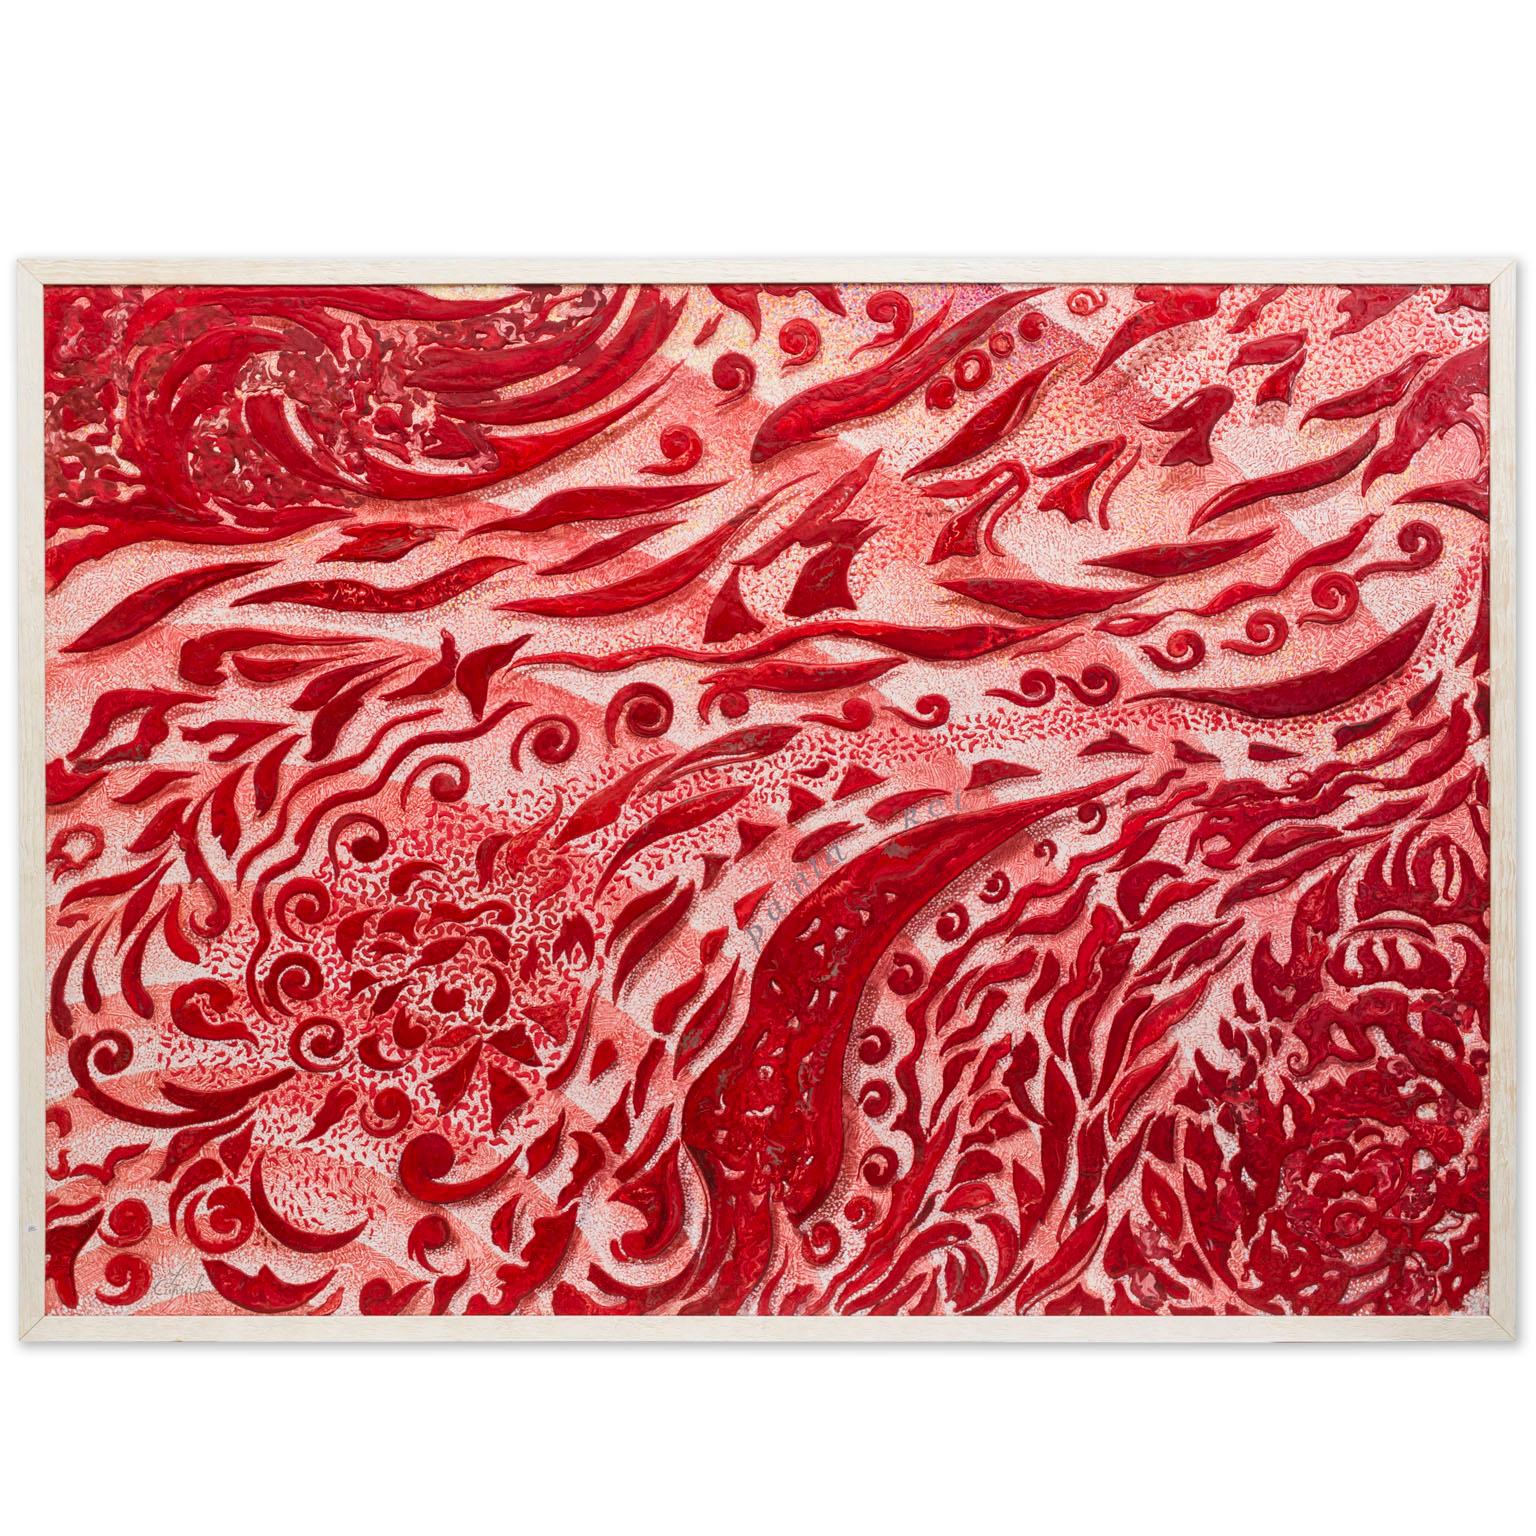  Wall panel modern red art decoration handmade in Italy by Cupioli available